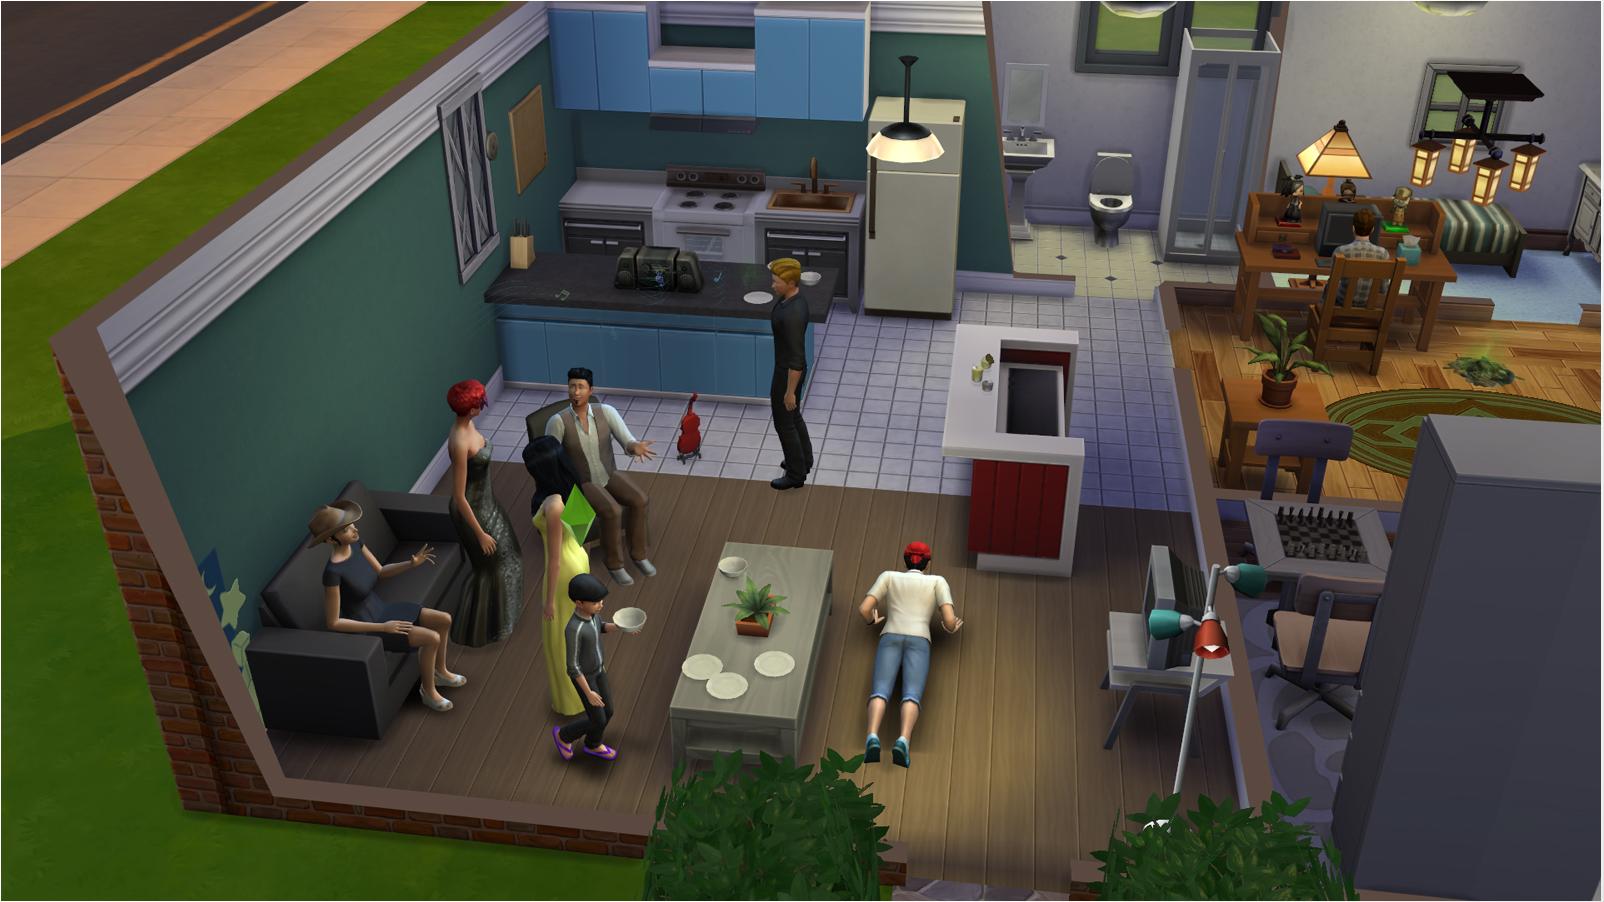 sims 4 free download for windows 10